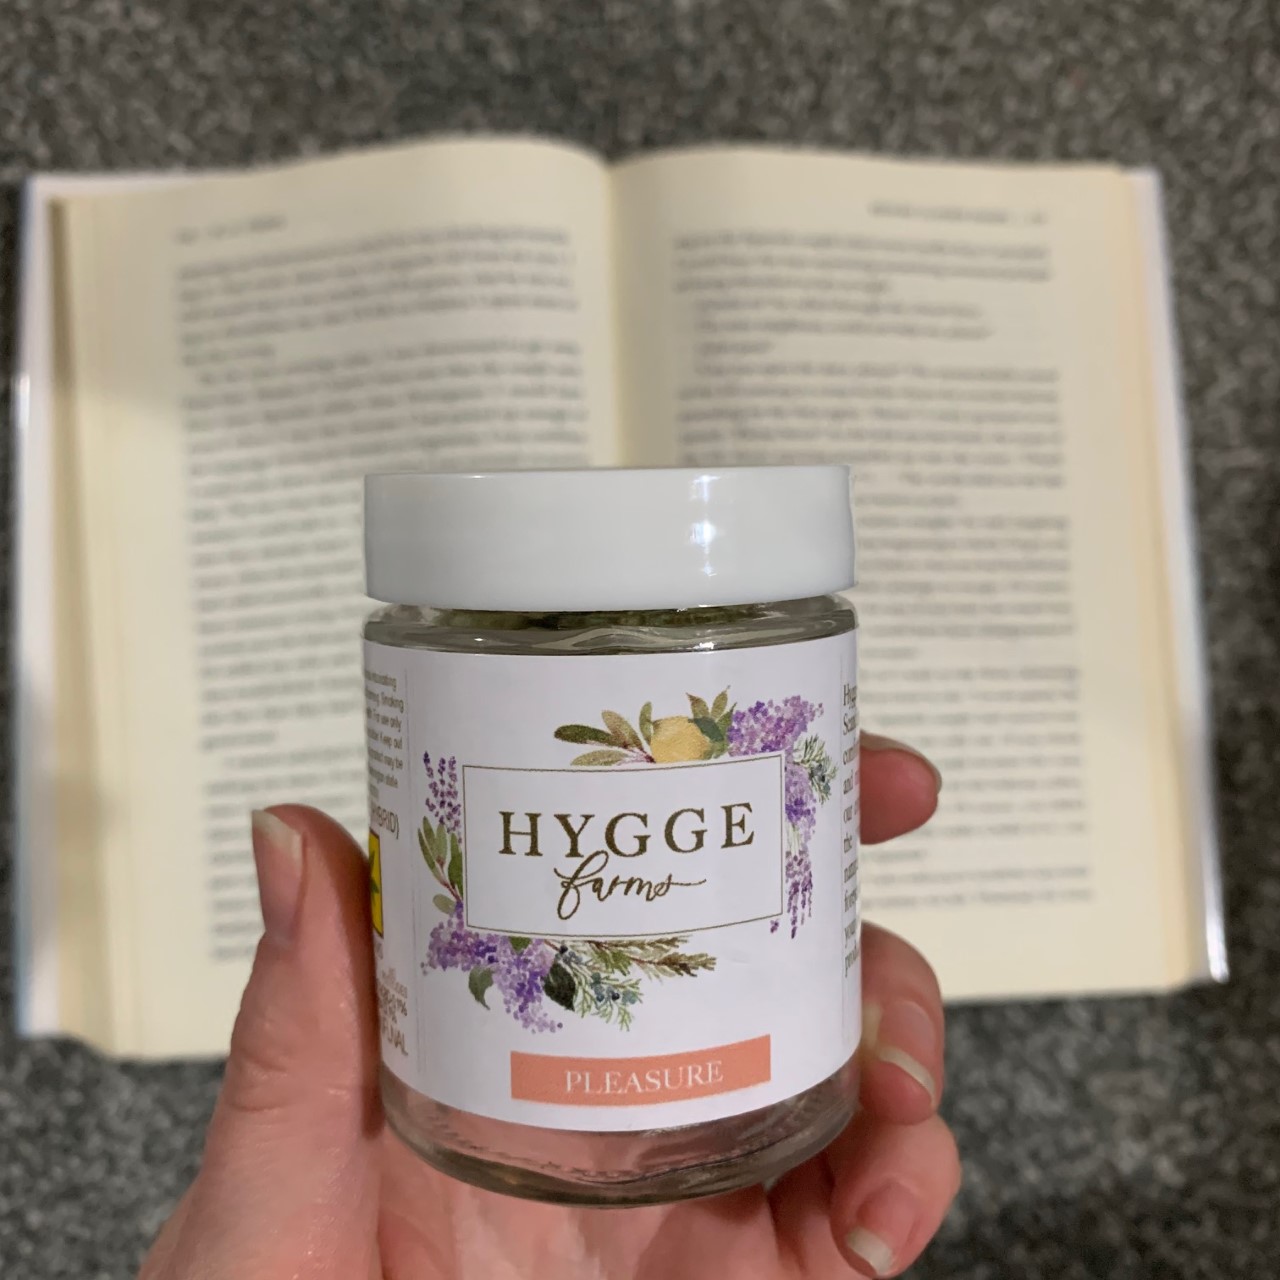 Hygge Farms and an open copy of Behind Closed Doors by B.A. Paris